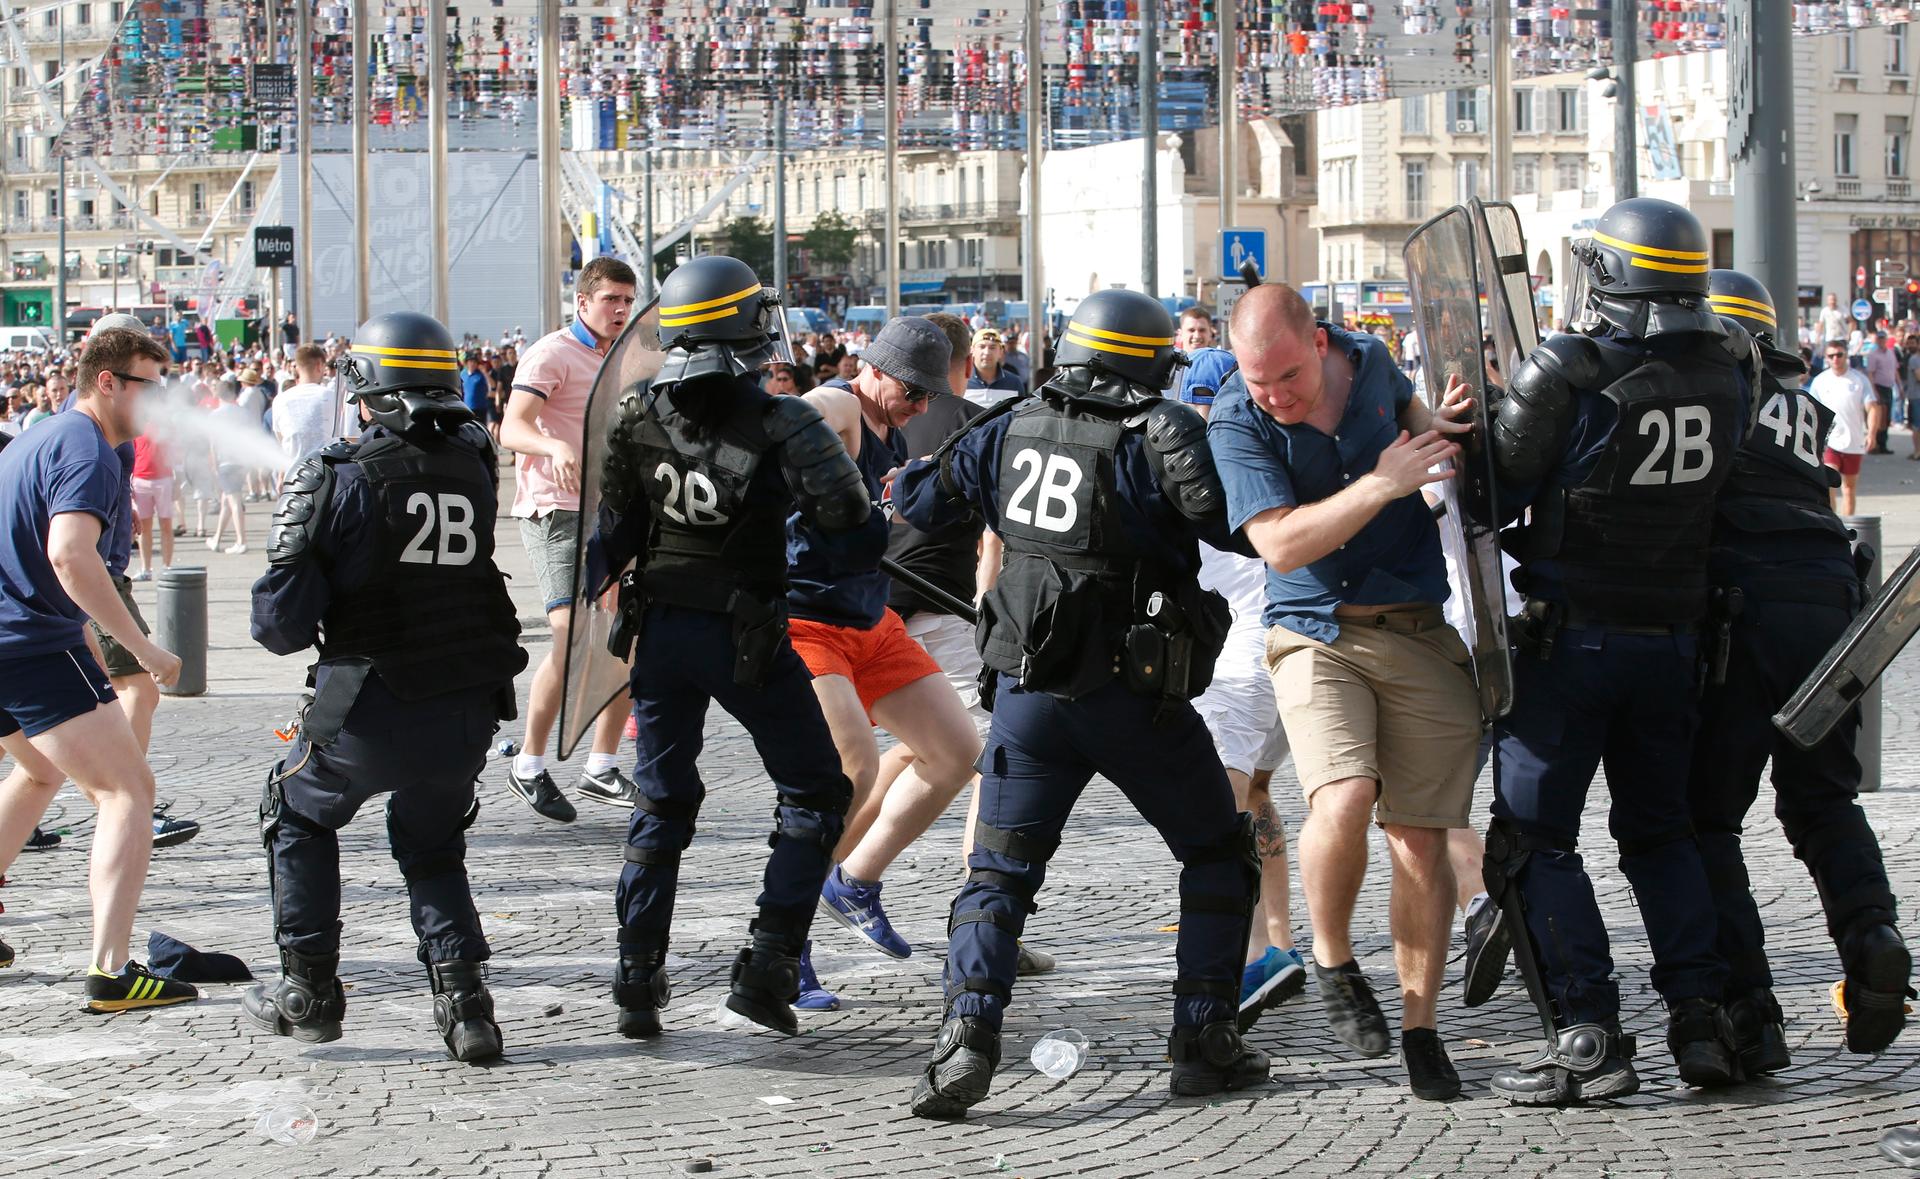 Police break up a fight between rival supporters at the old port of Marseille before the game.